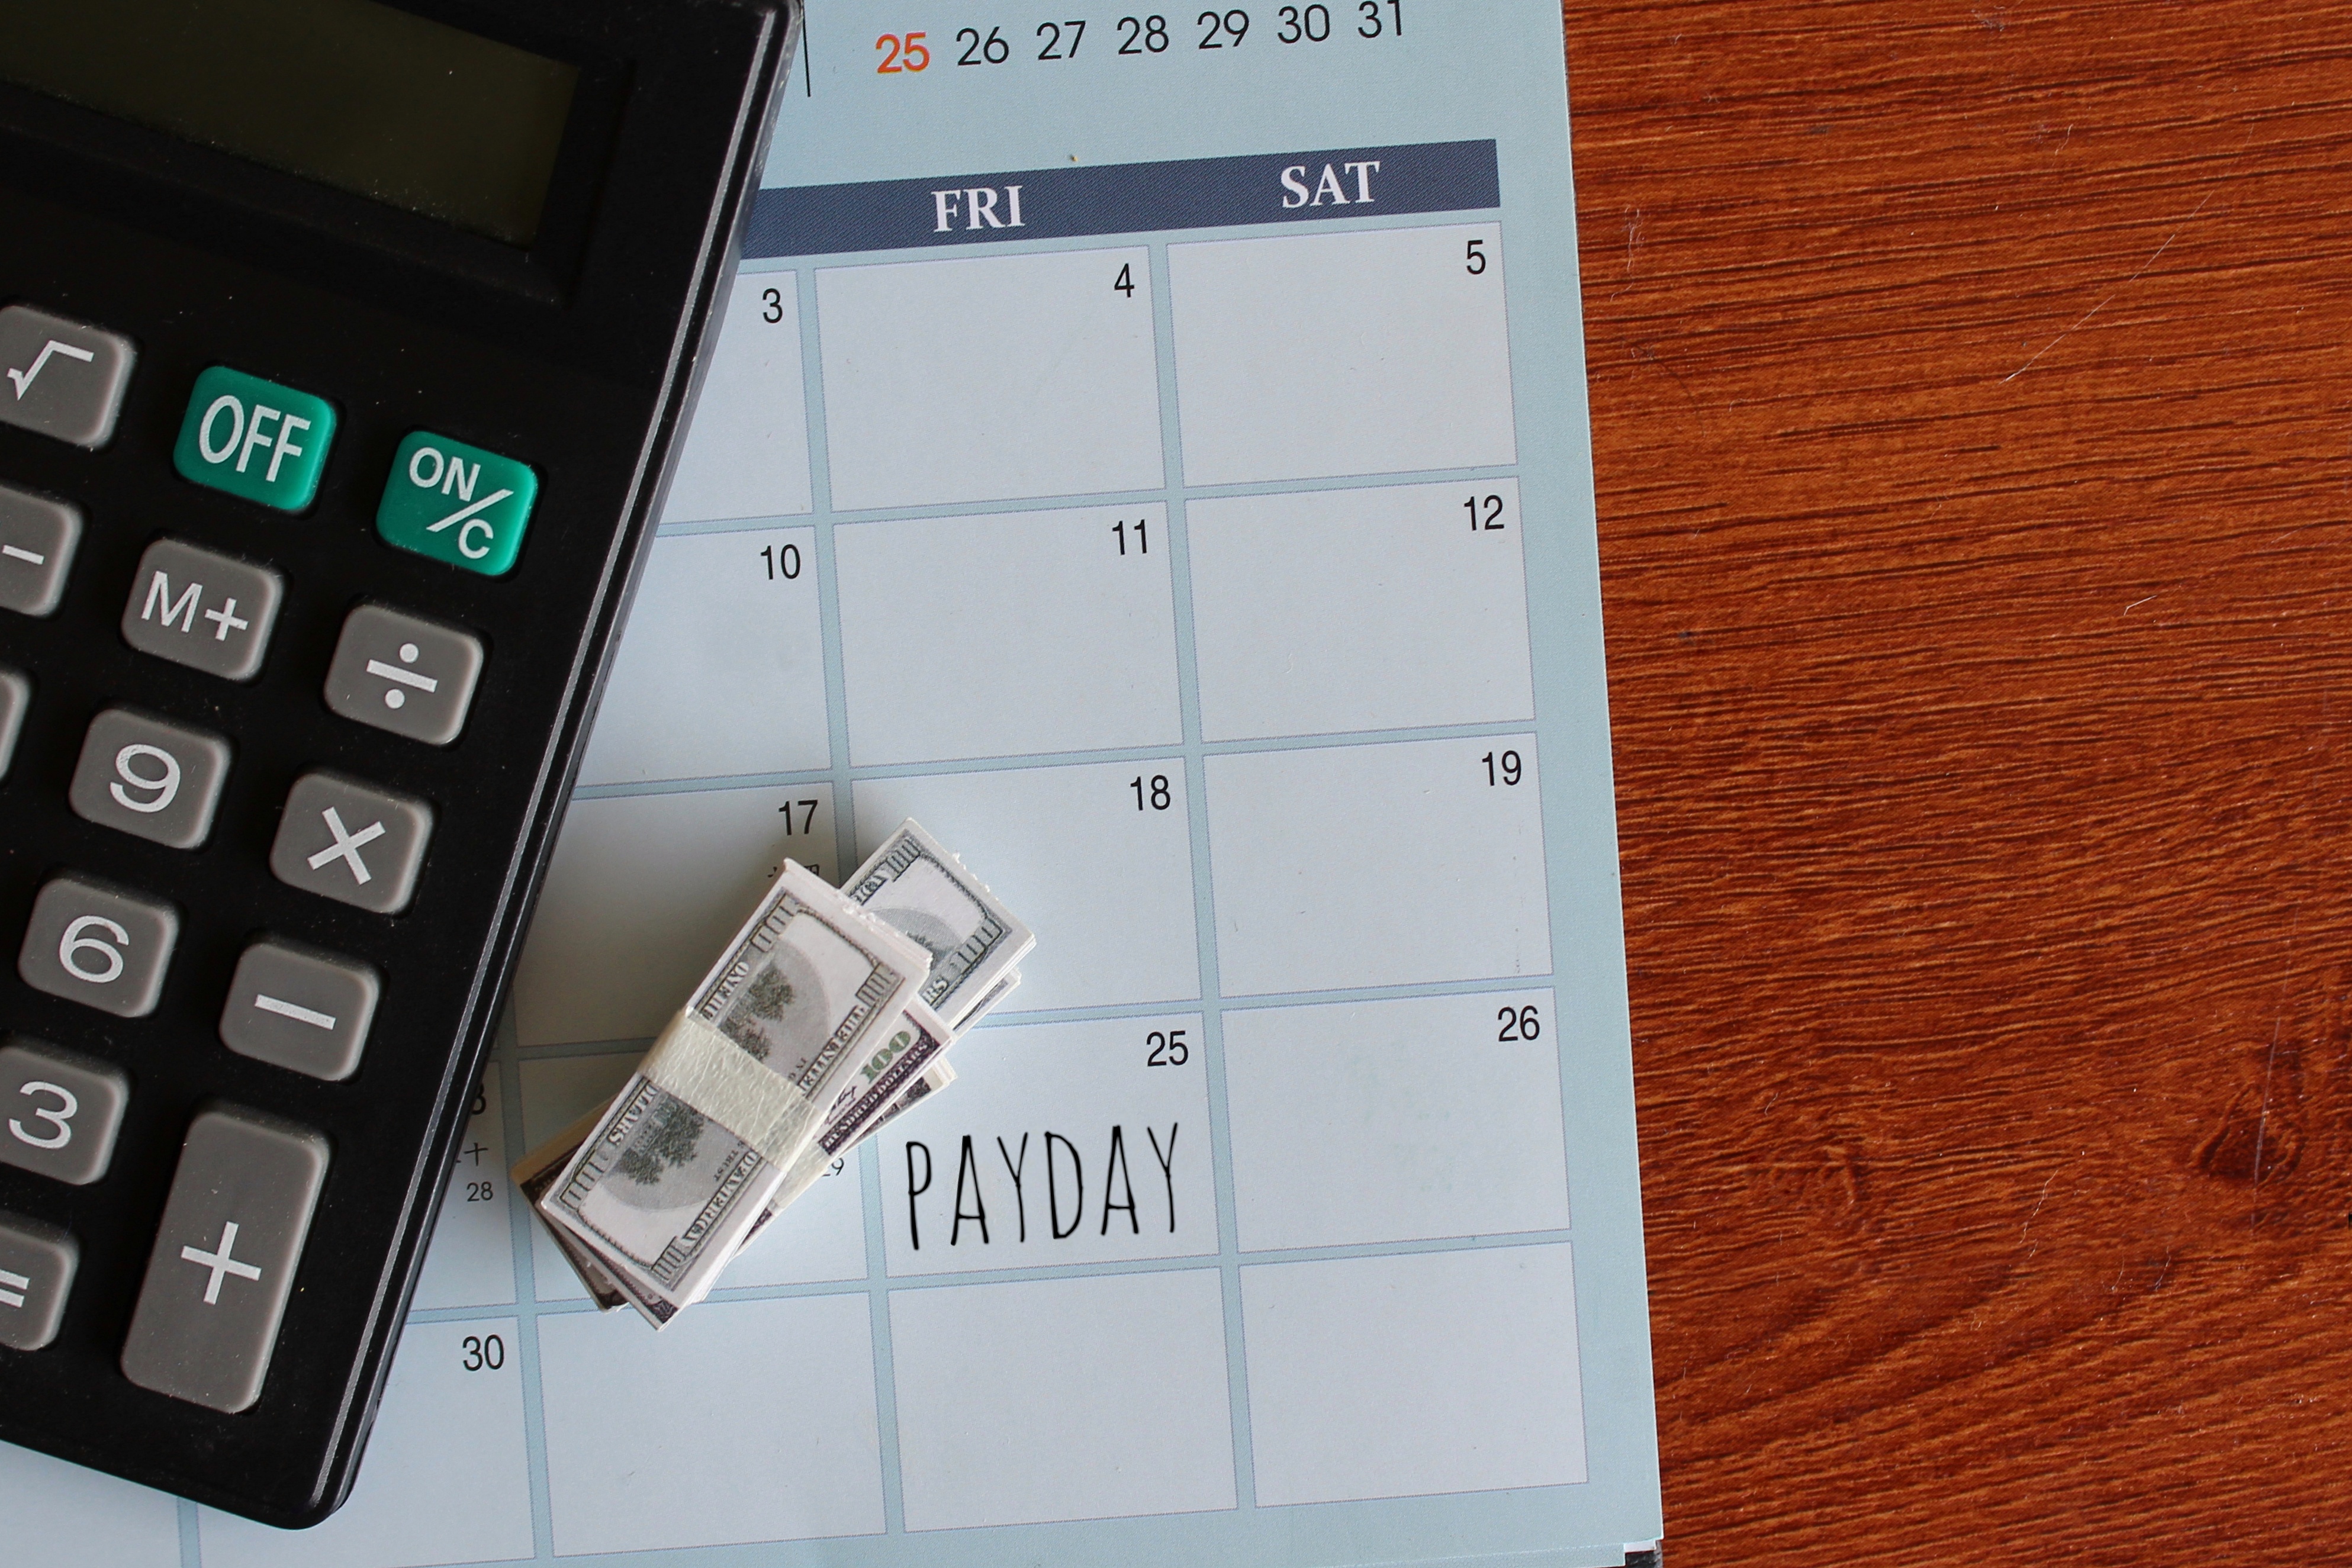 Top view image of banknotes, calculator and PAYDAY written on a calendar